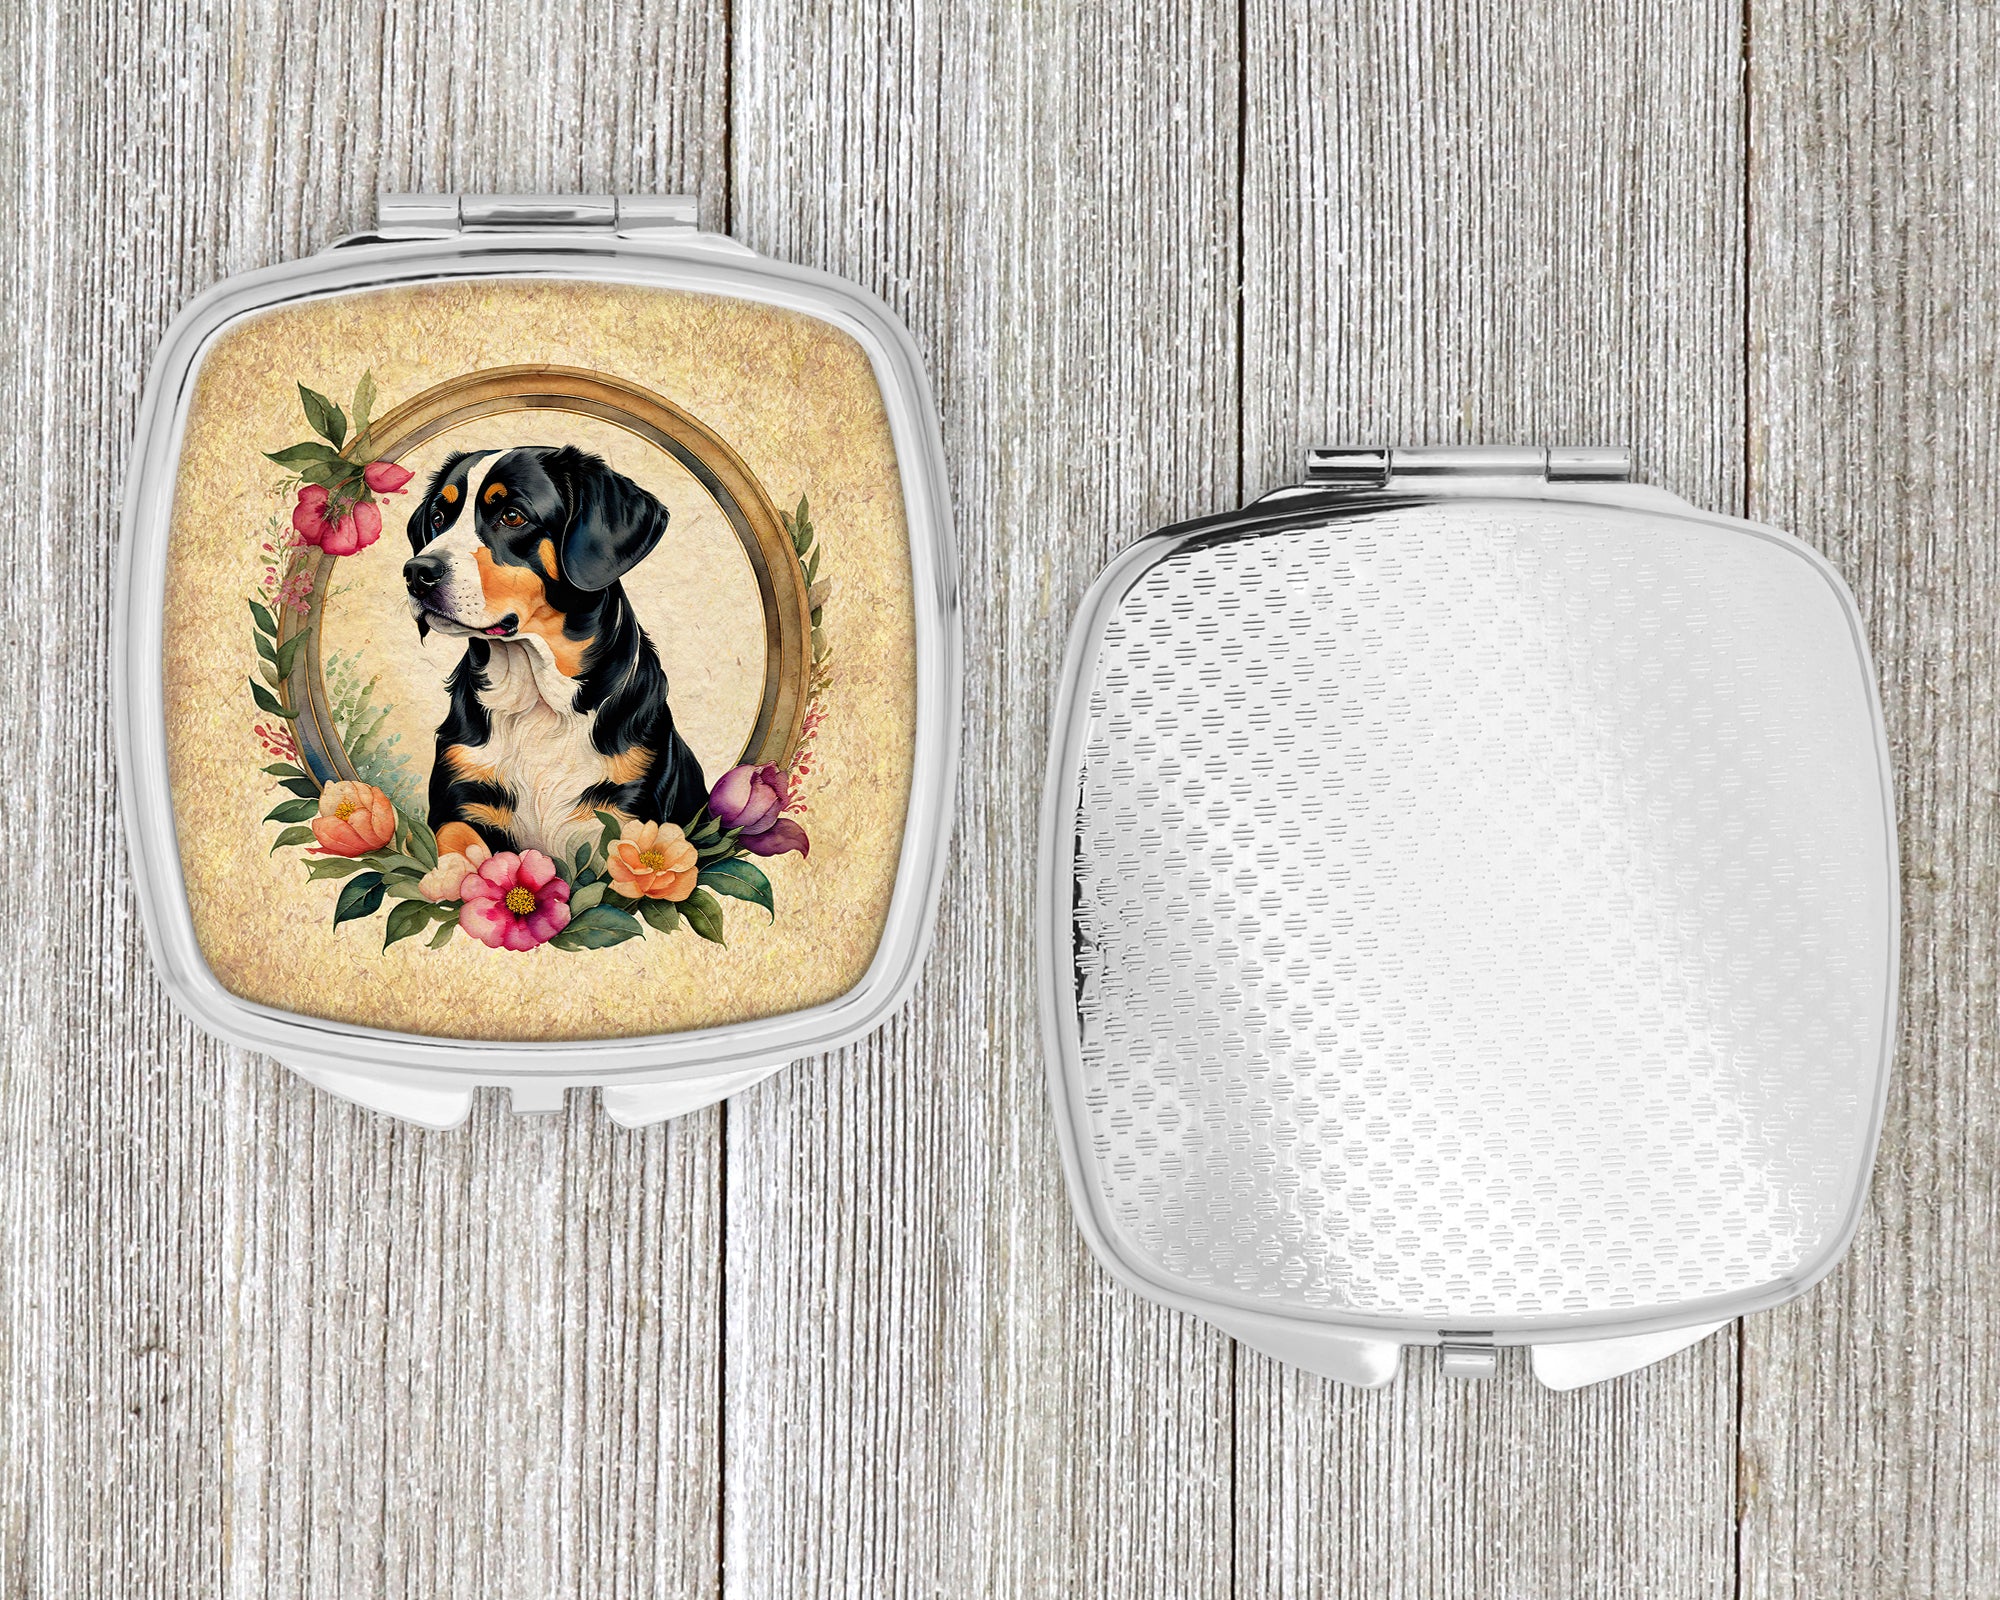 Entlebucher Mountain Dog and Flowers Compact Mirror